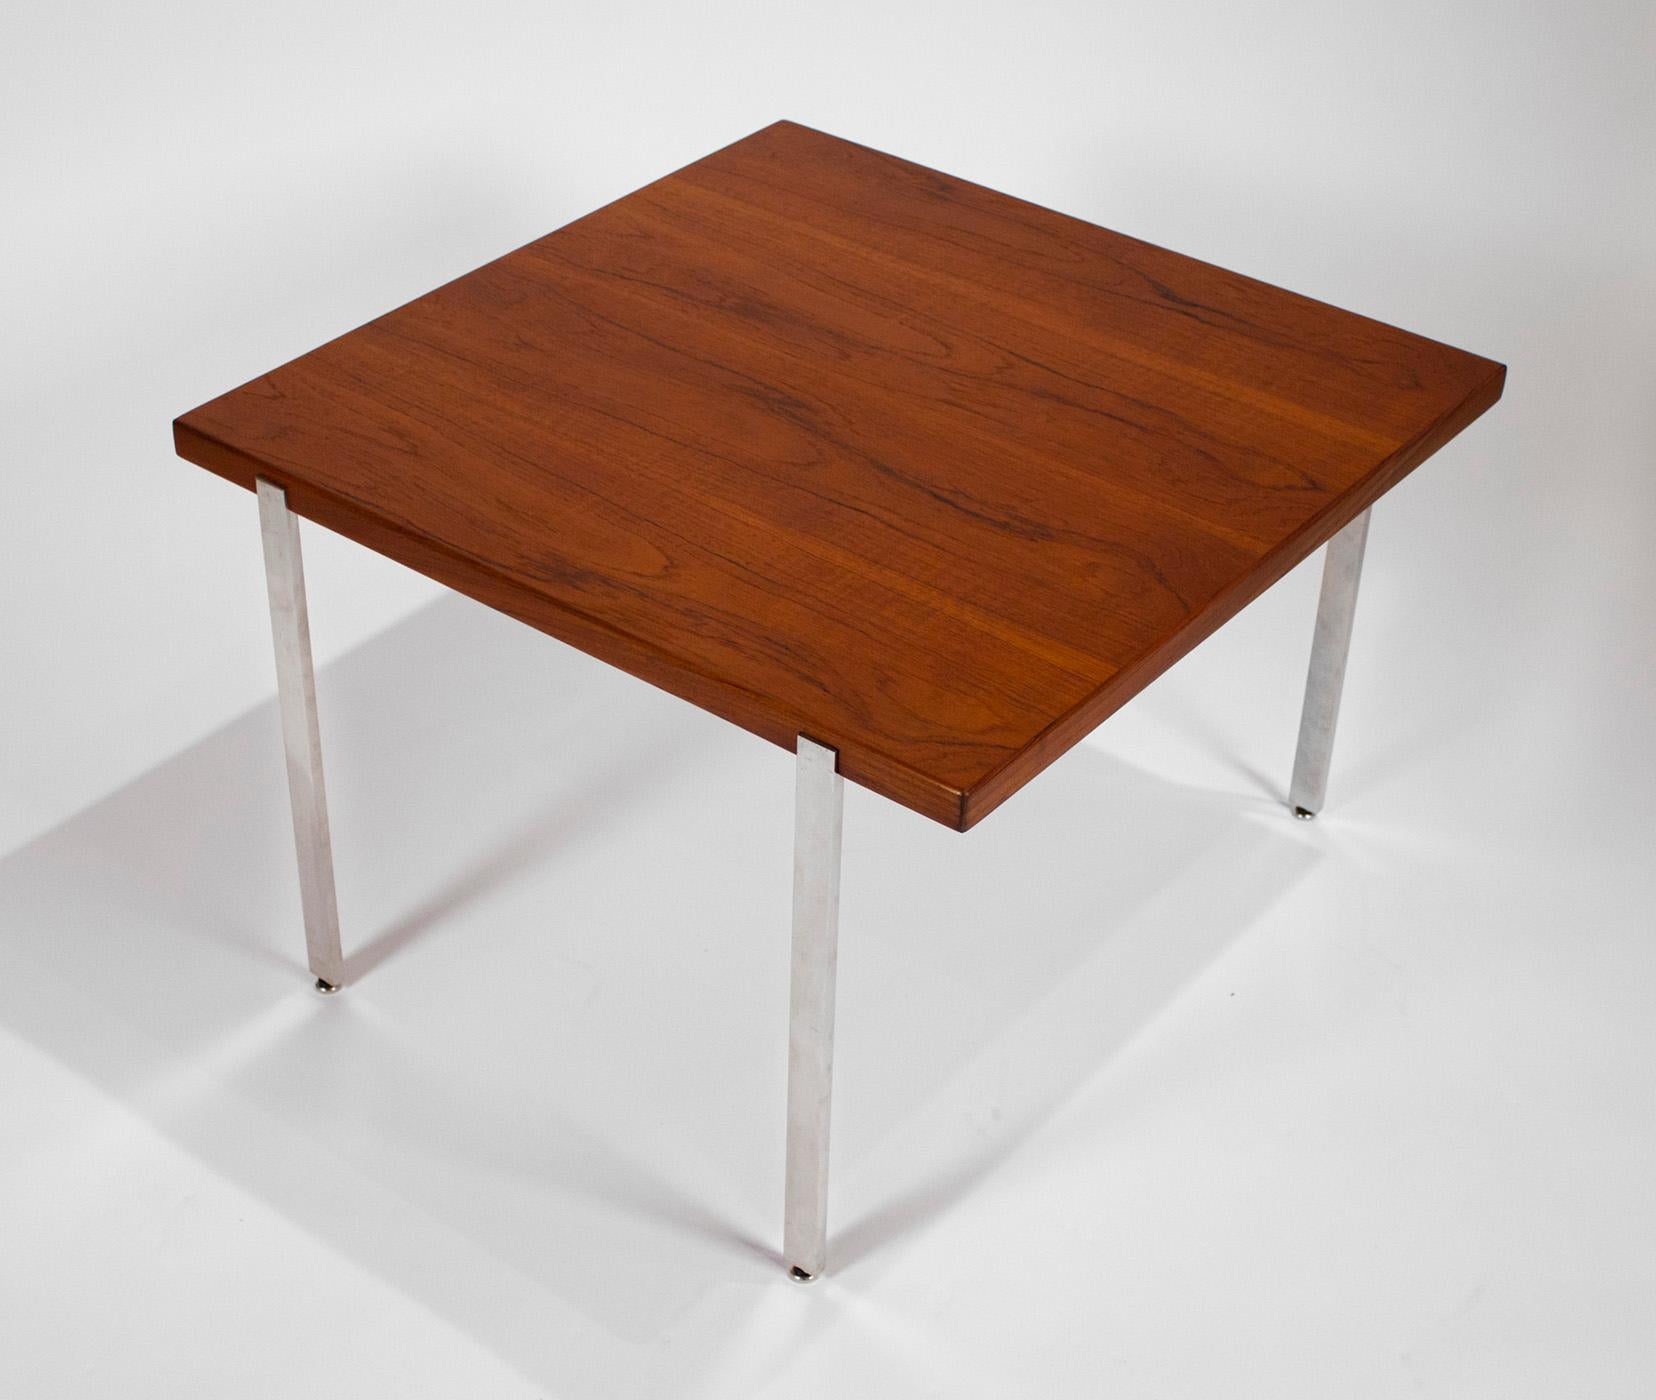 Mid-Century Modern Harvey Probber Side Table in Teak and Polished Stainless Steel, 1960s For Sale